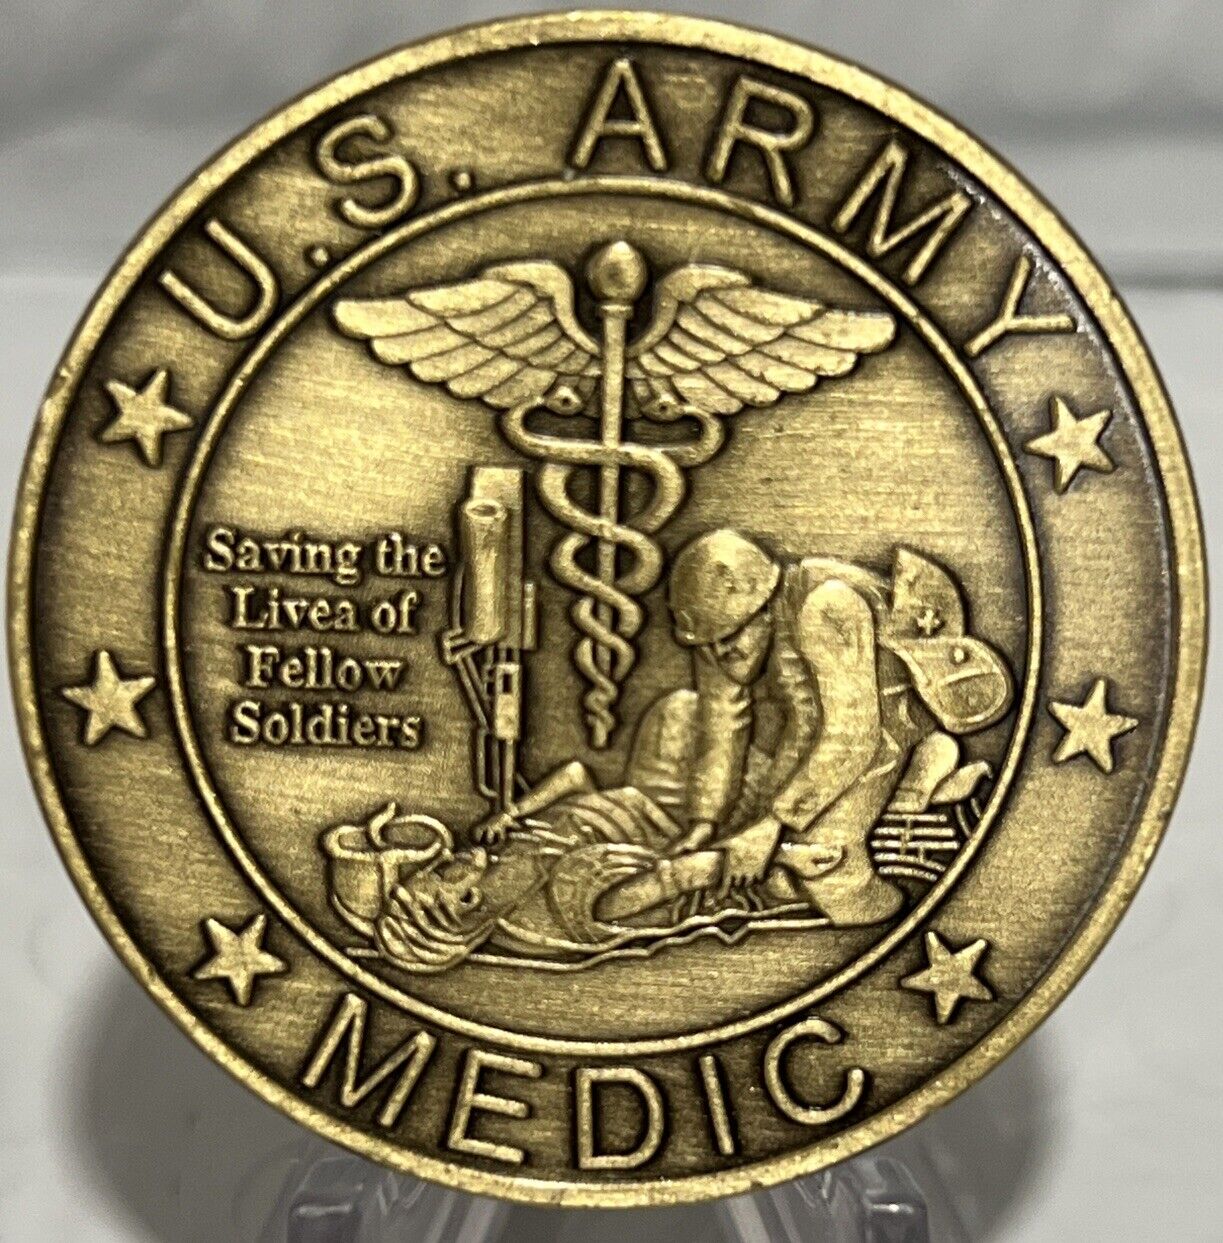 * US Army / Medic Collectible Army Challenge Coin Serving US Army Strong 1775